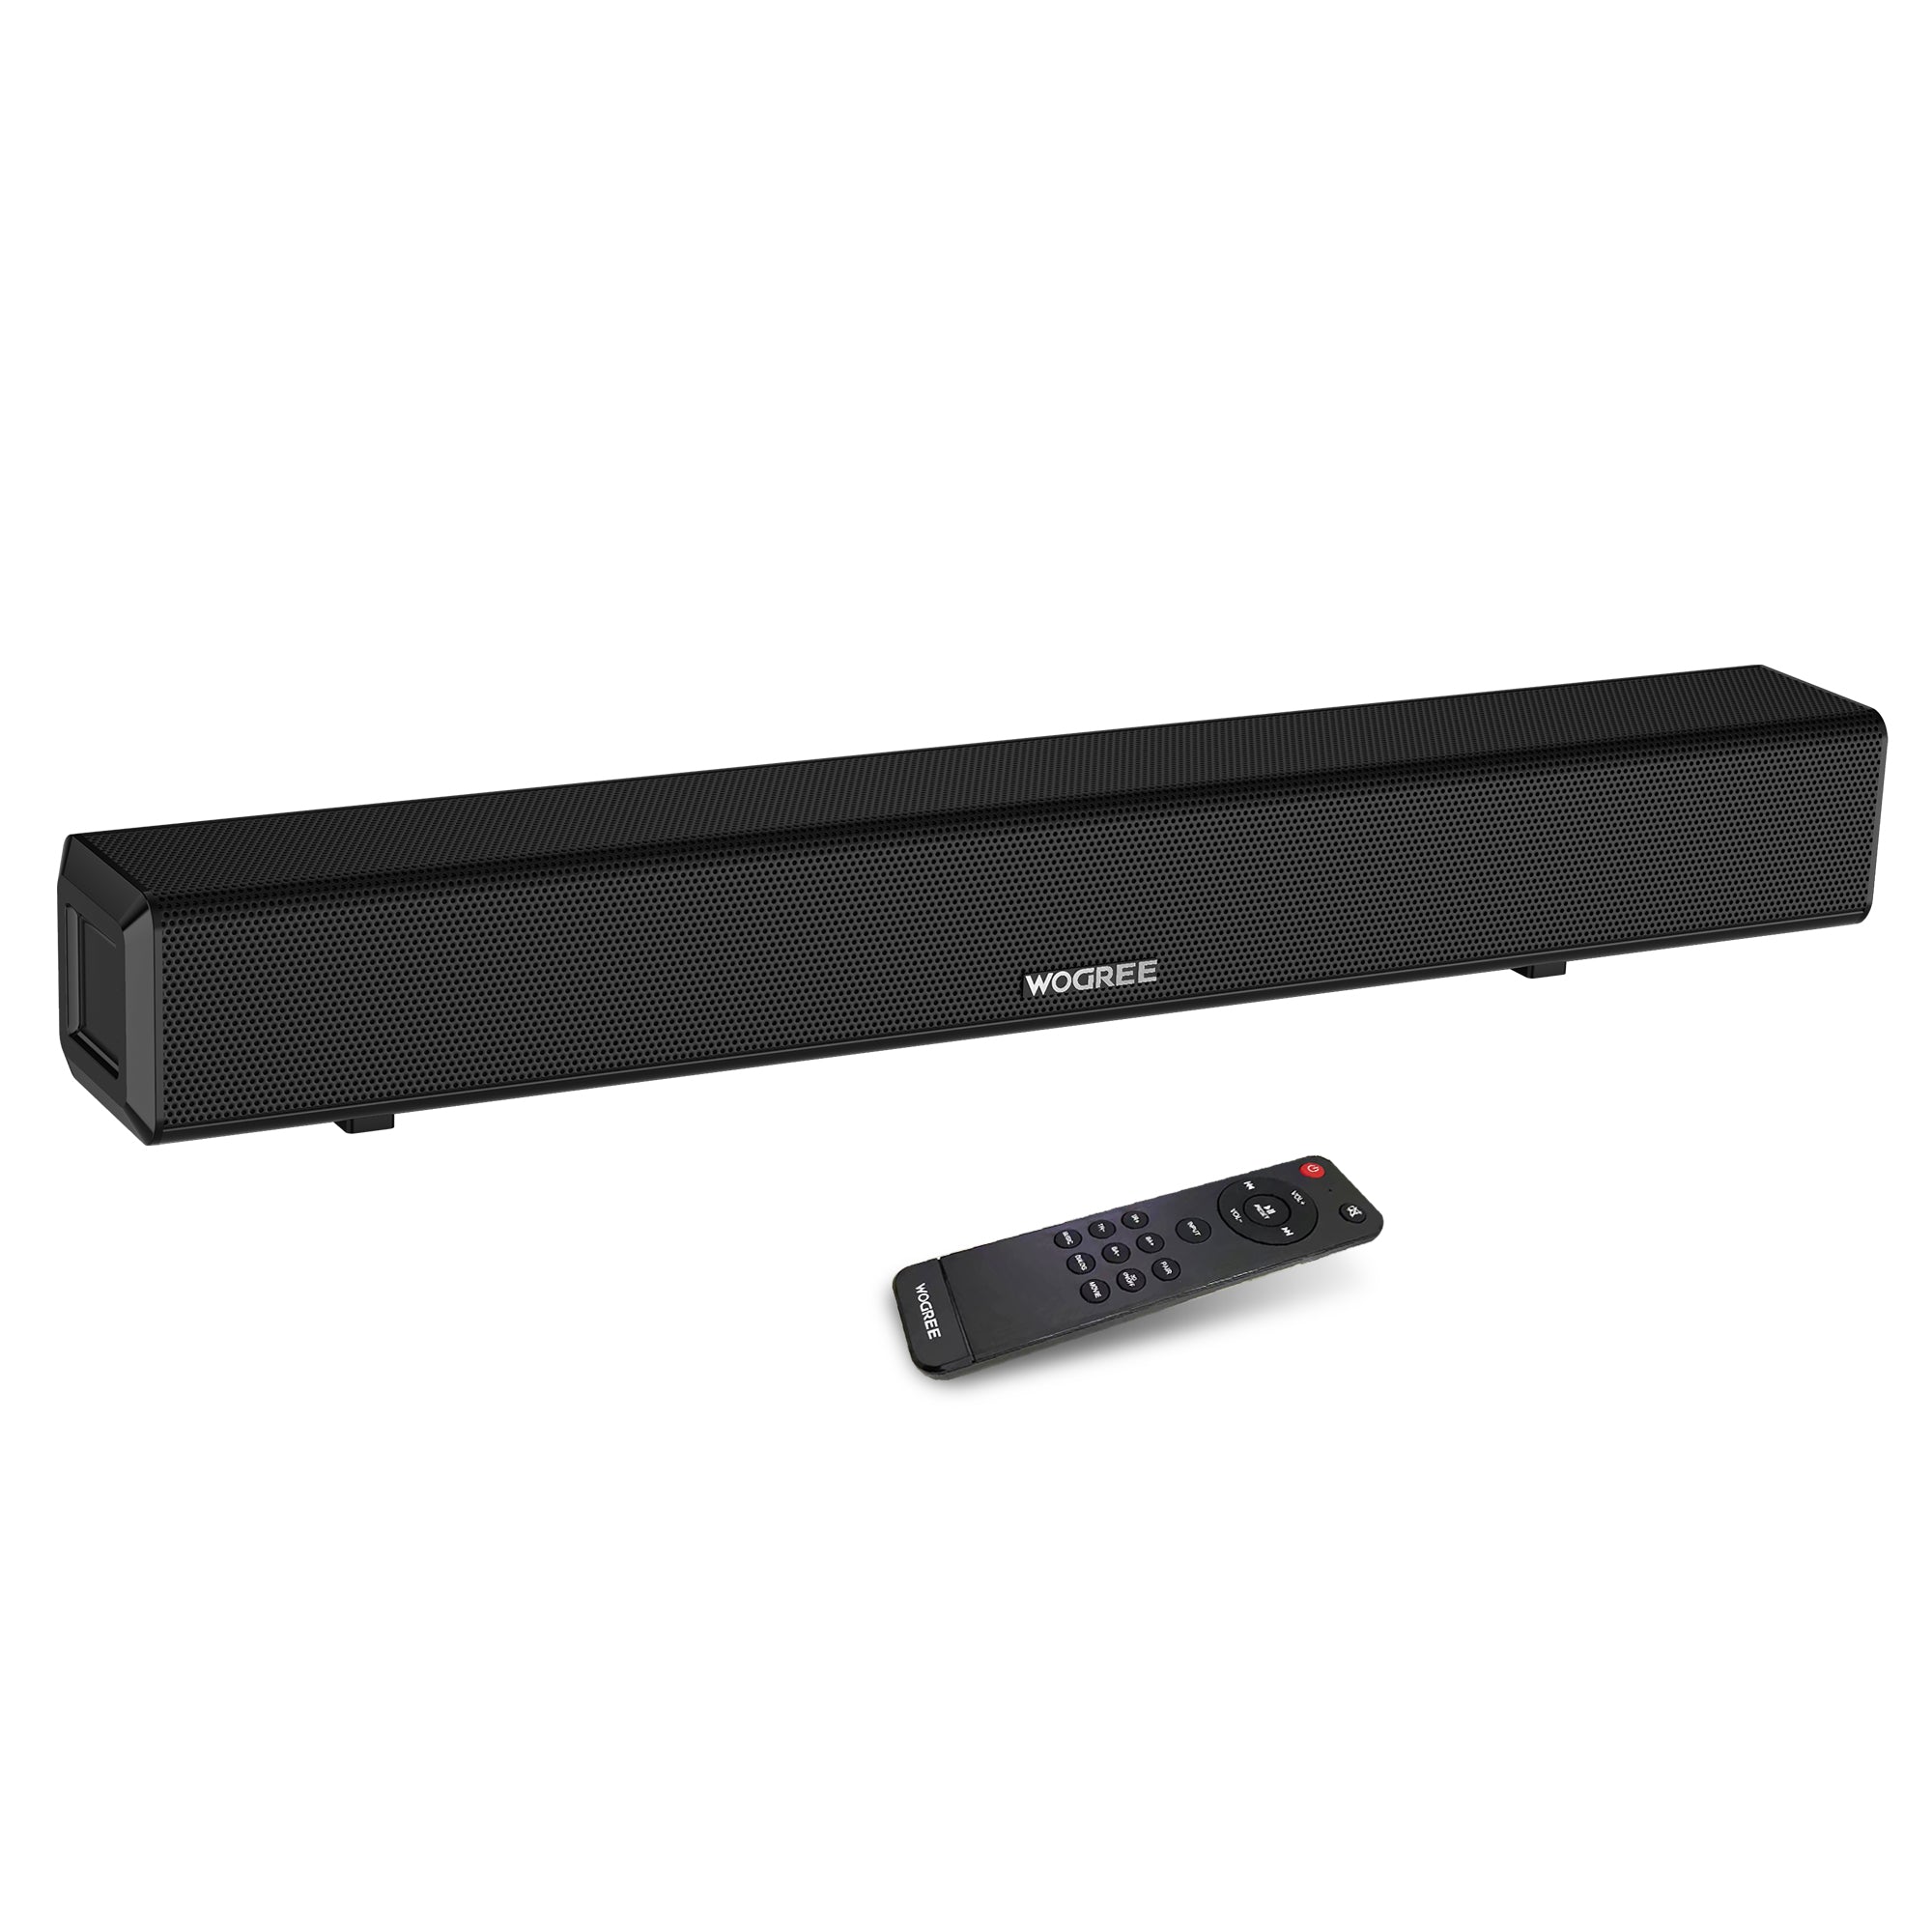 Wogree 2.1ch Soundbar with Built-in Subwoofer, 80W 24 Inch Compact Sma